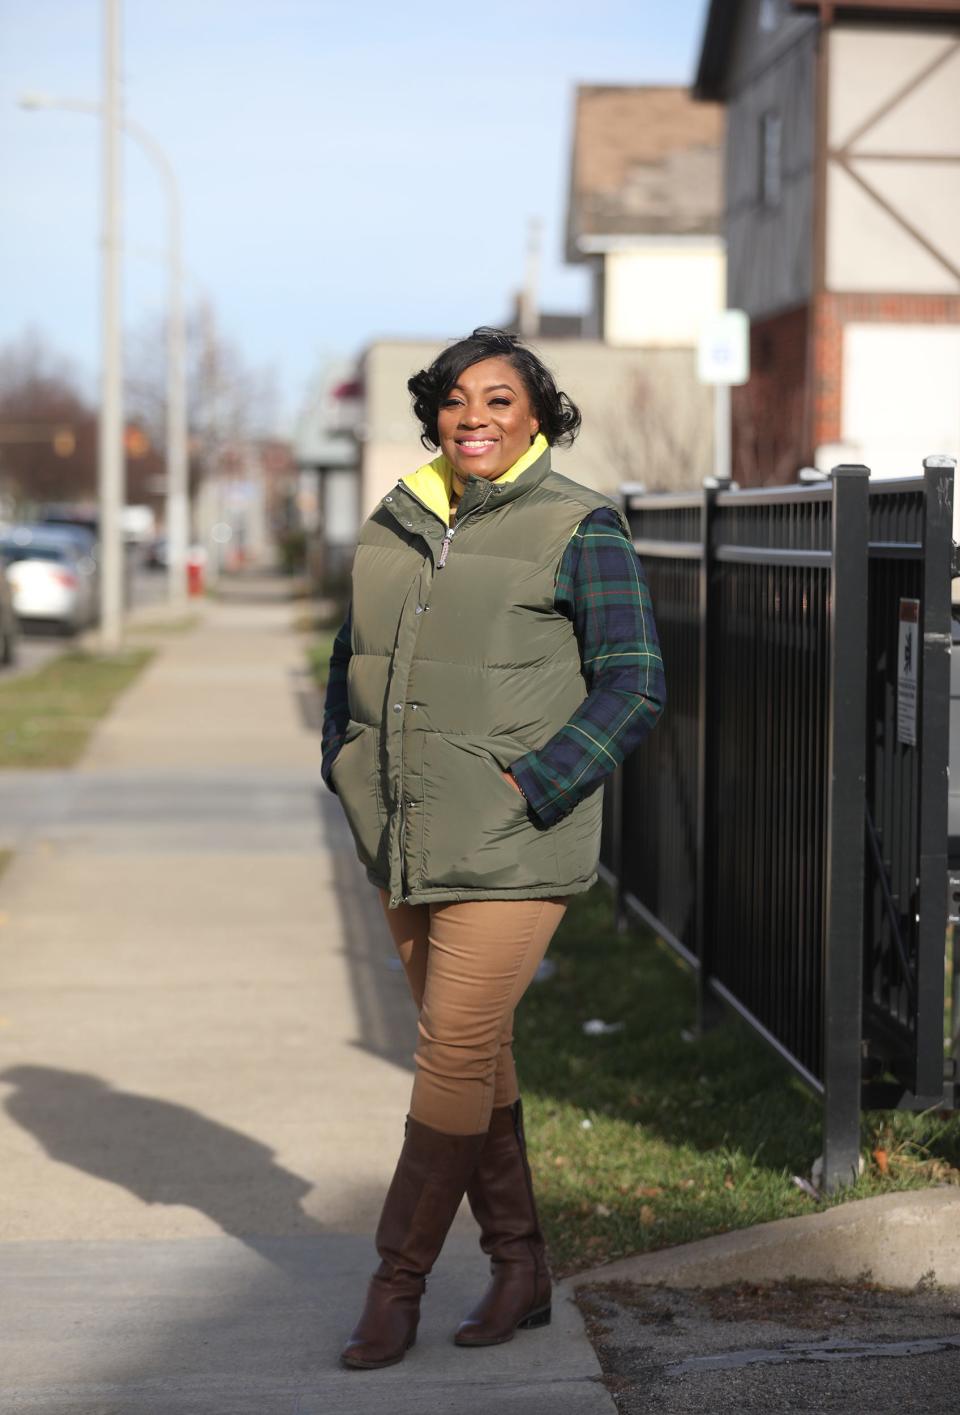 Kareema Morris, of Buffalo, NY said she has added different programs with her Bury the Violence work.  One program, Peace in Range, is about health and wellness through activities like hikes and horseback riding.  The other program she offers is Buffalo Against Domestic Violence.